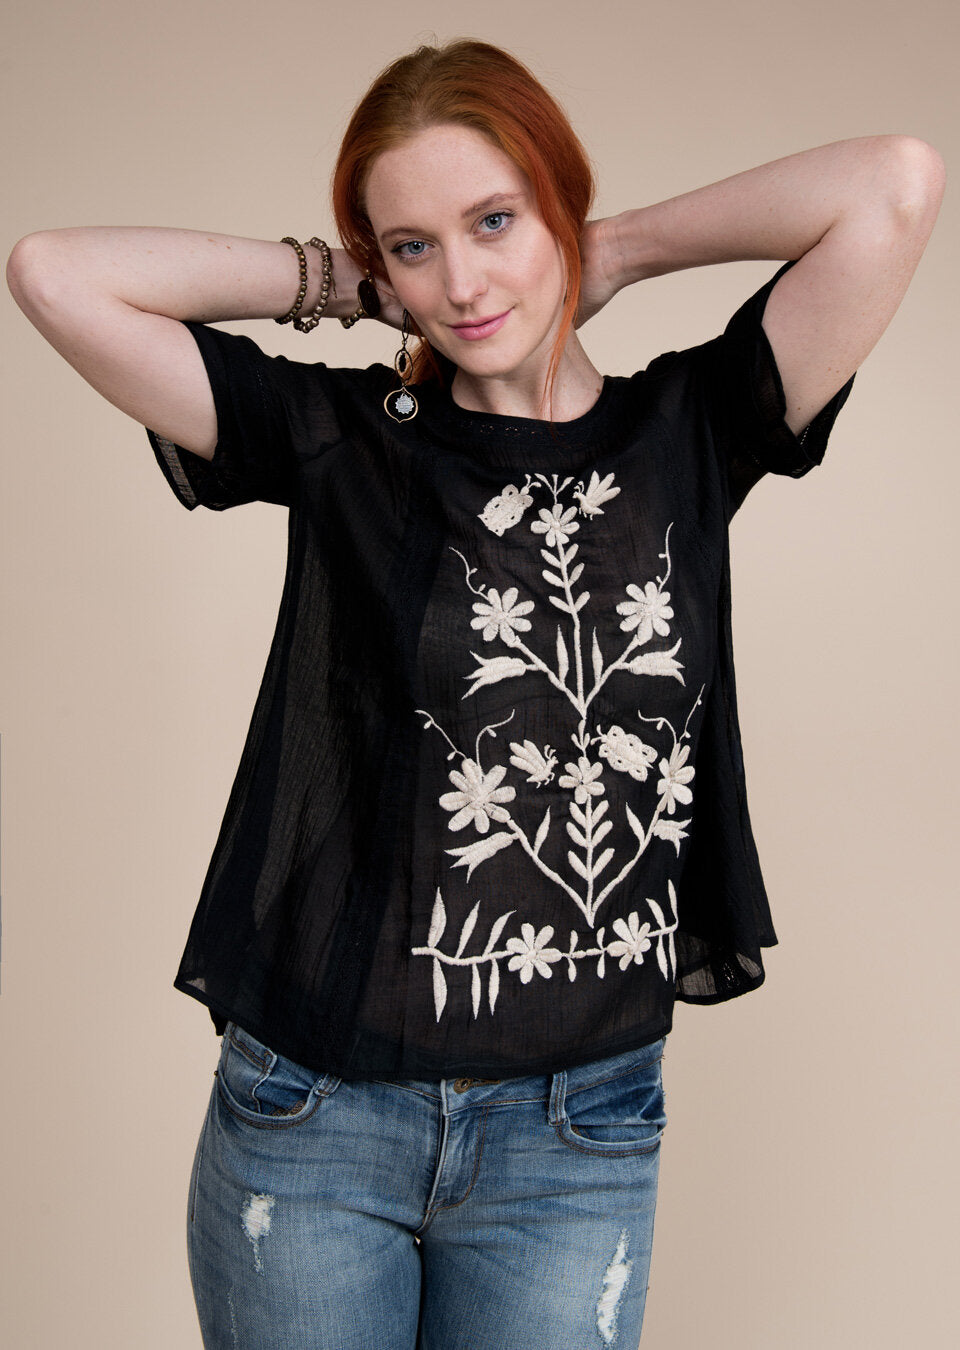 Ivy Jane short sleeve top with floral embroidery